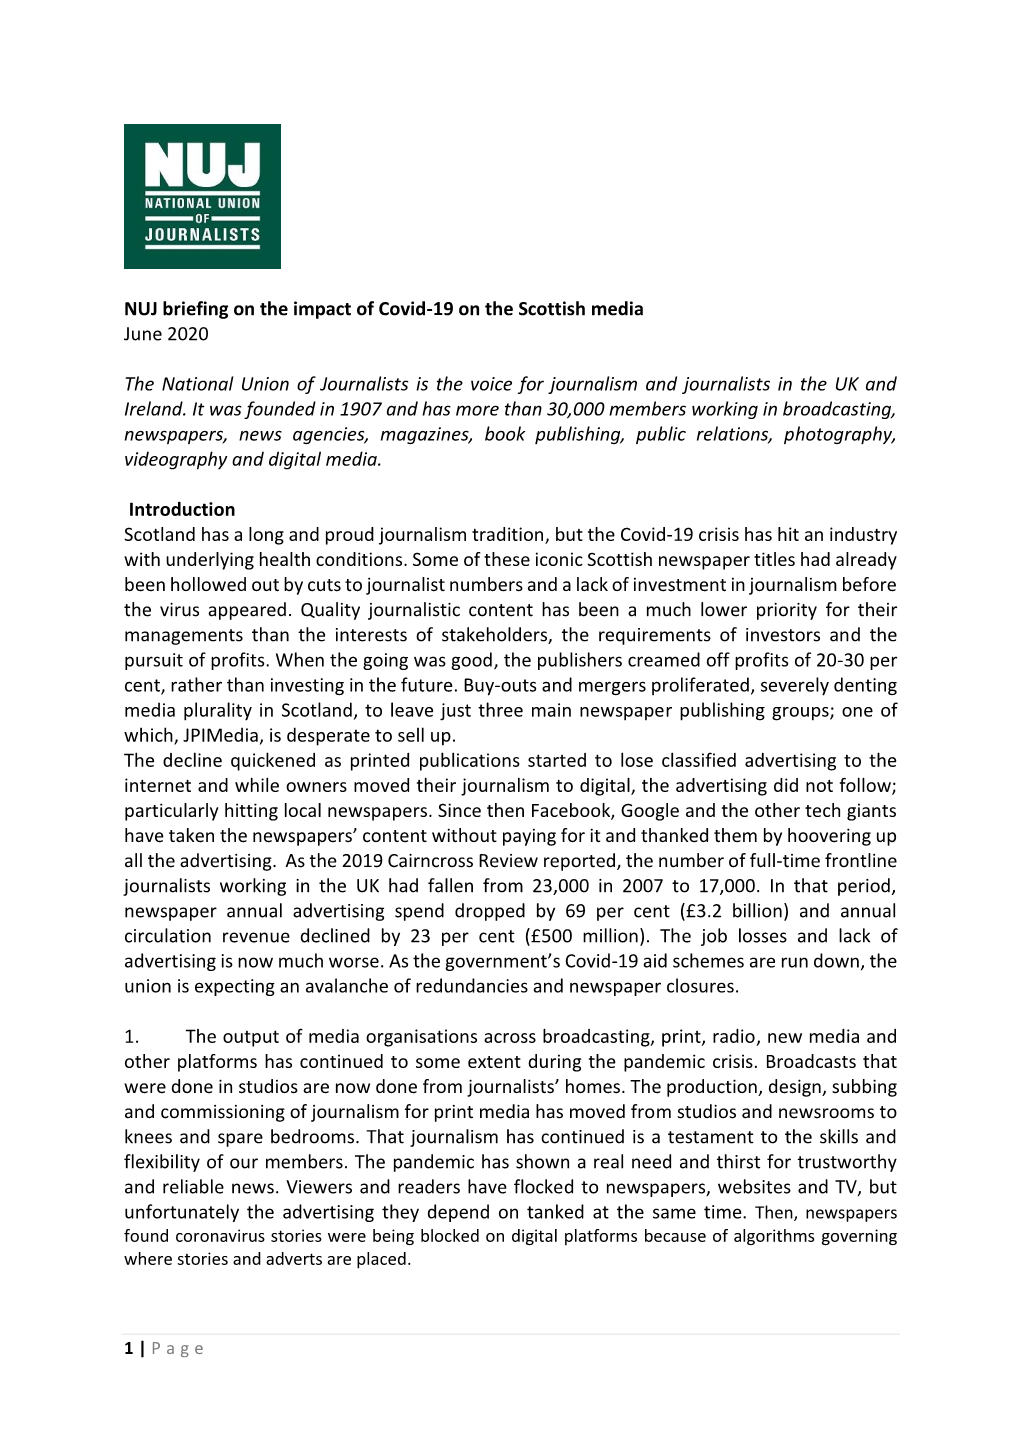 NUJ Briefing on the Impact of Covid-19 on the Scottish Media June 2020